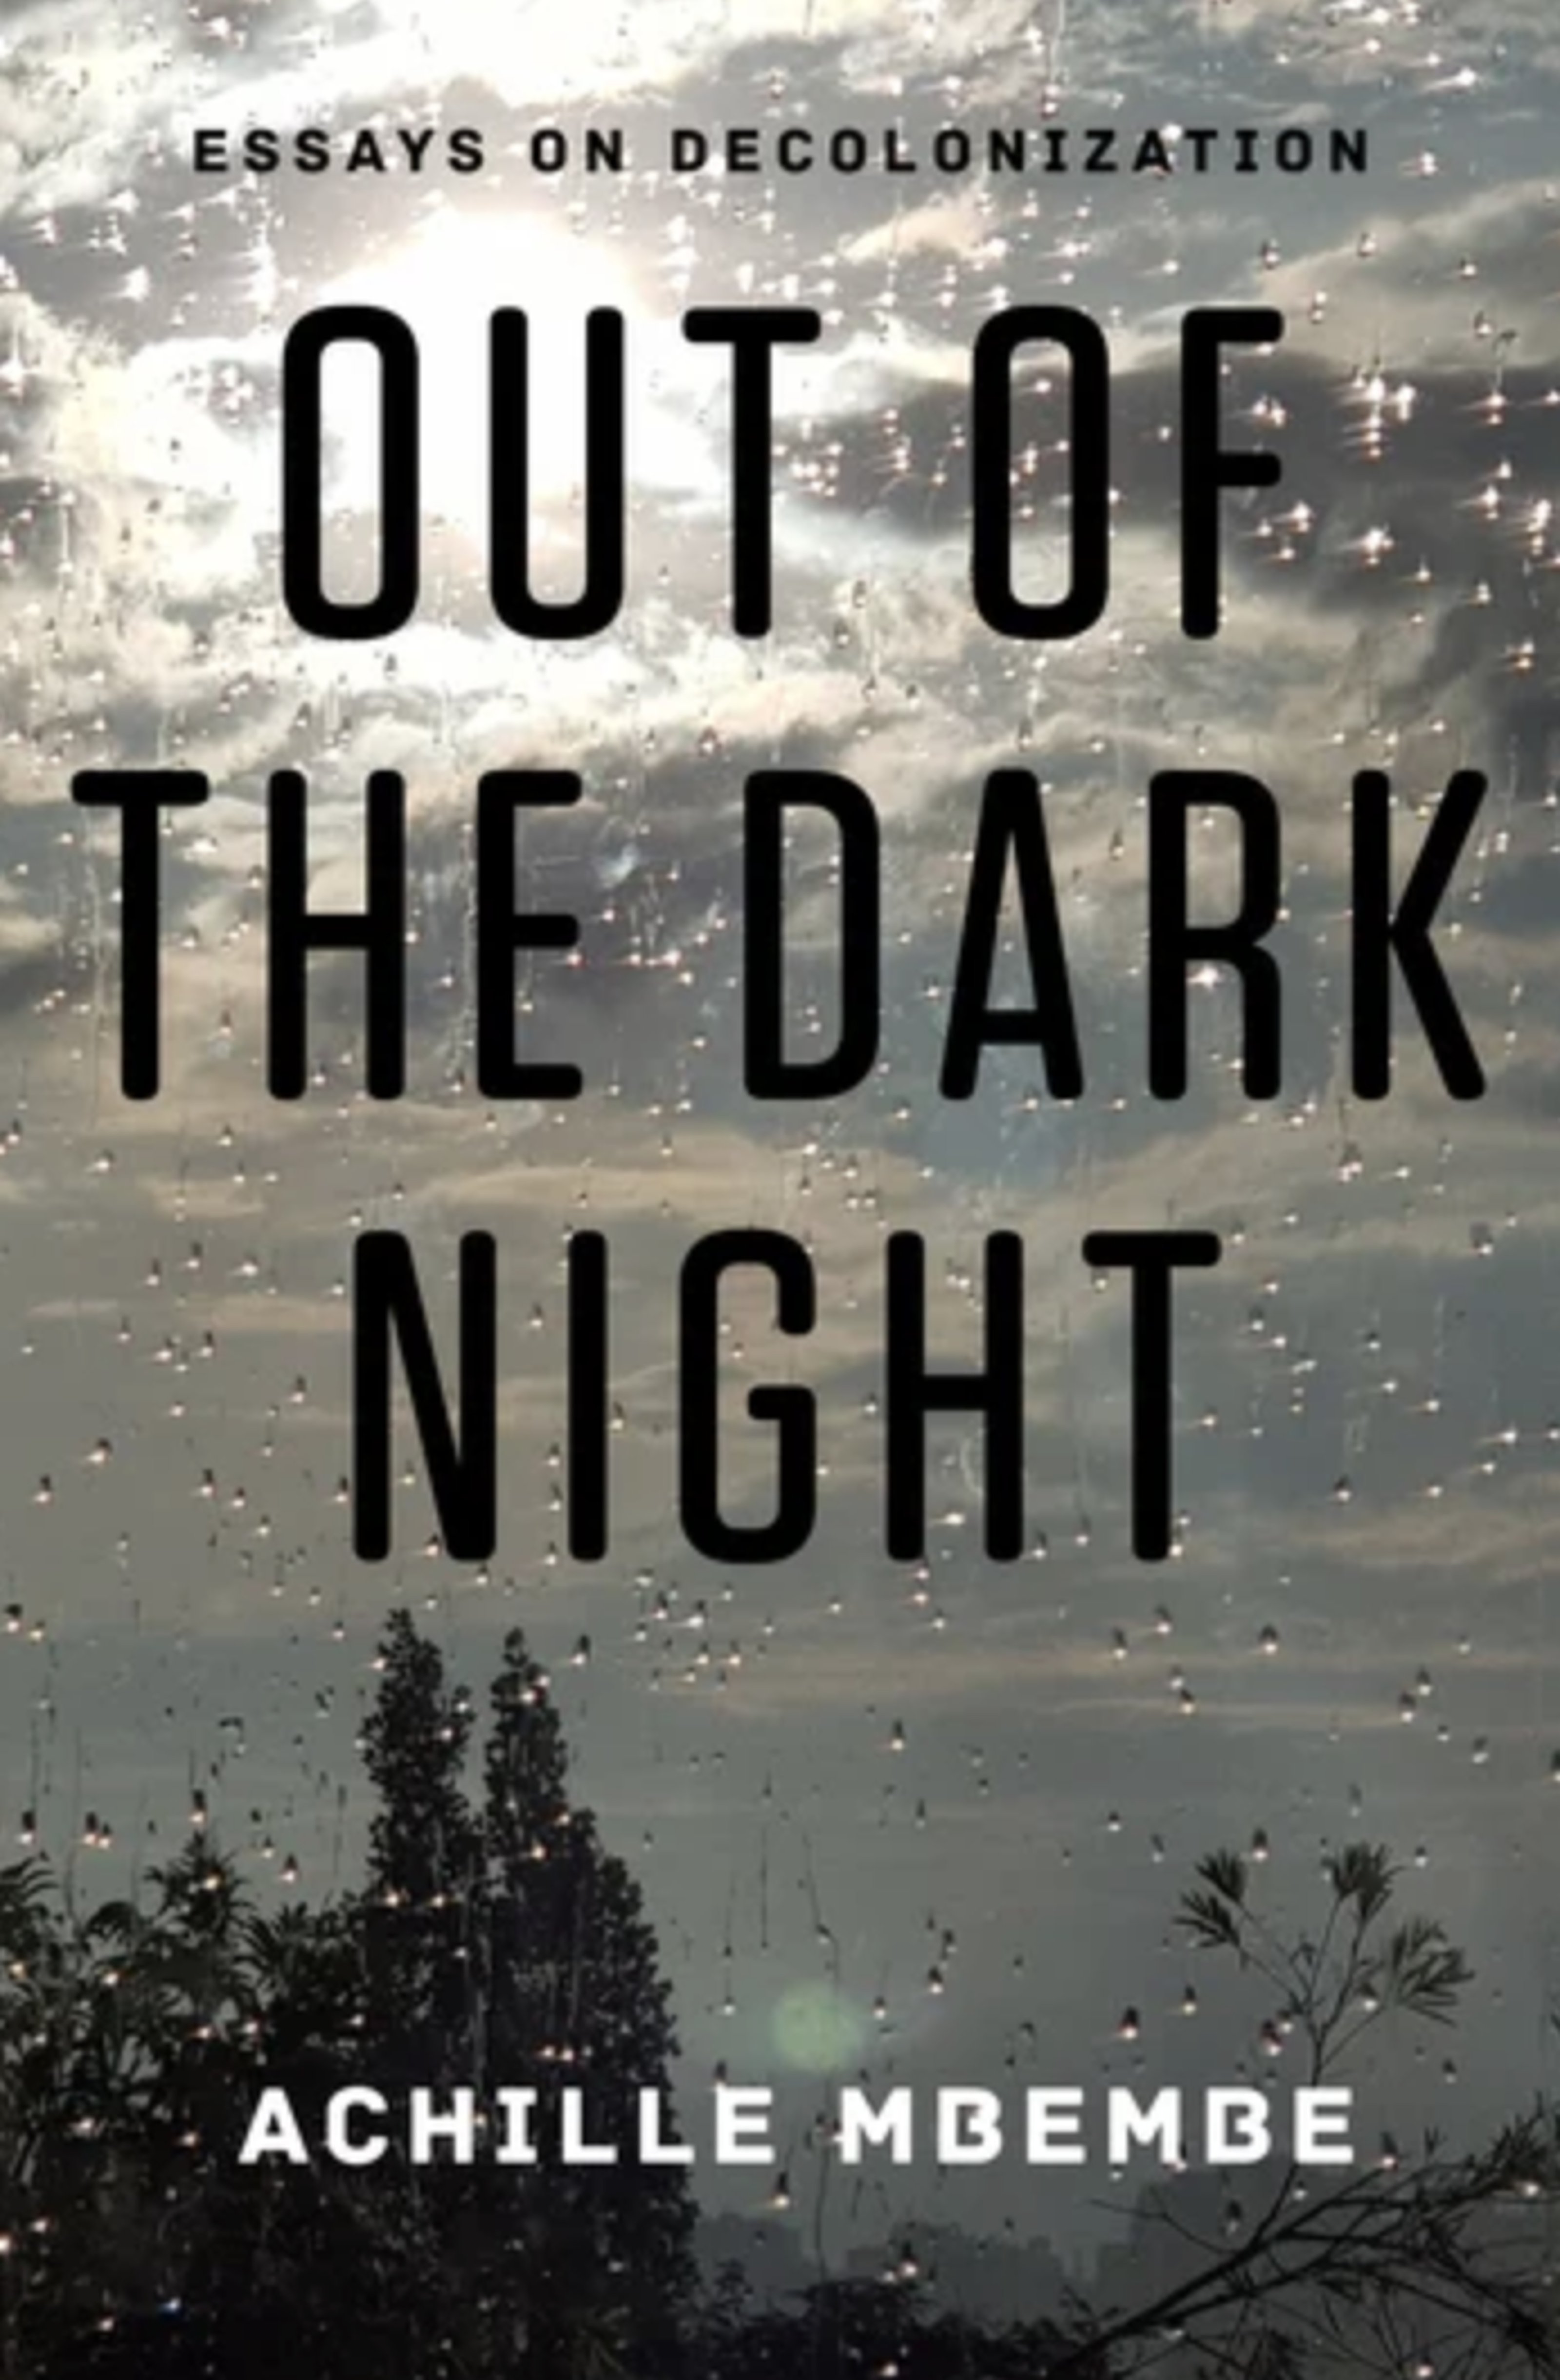 Achille Mbembe's book cover for Out of the Dark Night Essays on Decolonization Columbia University Press